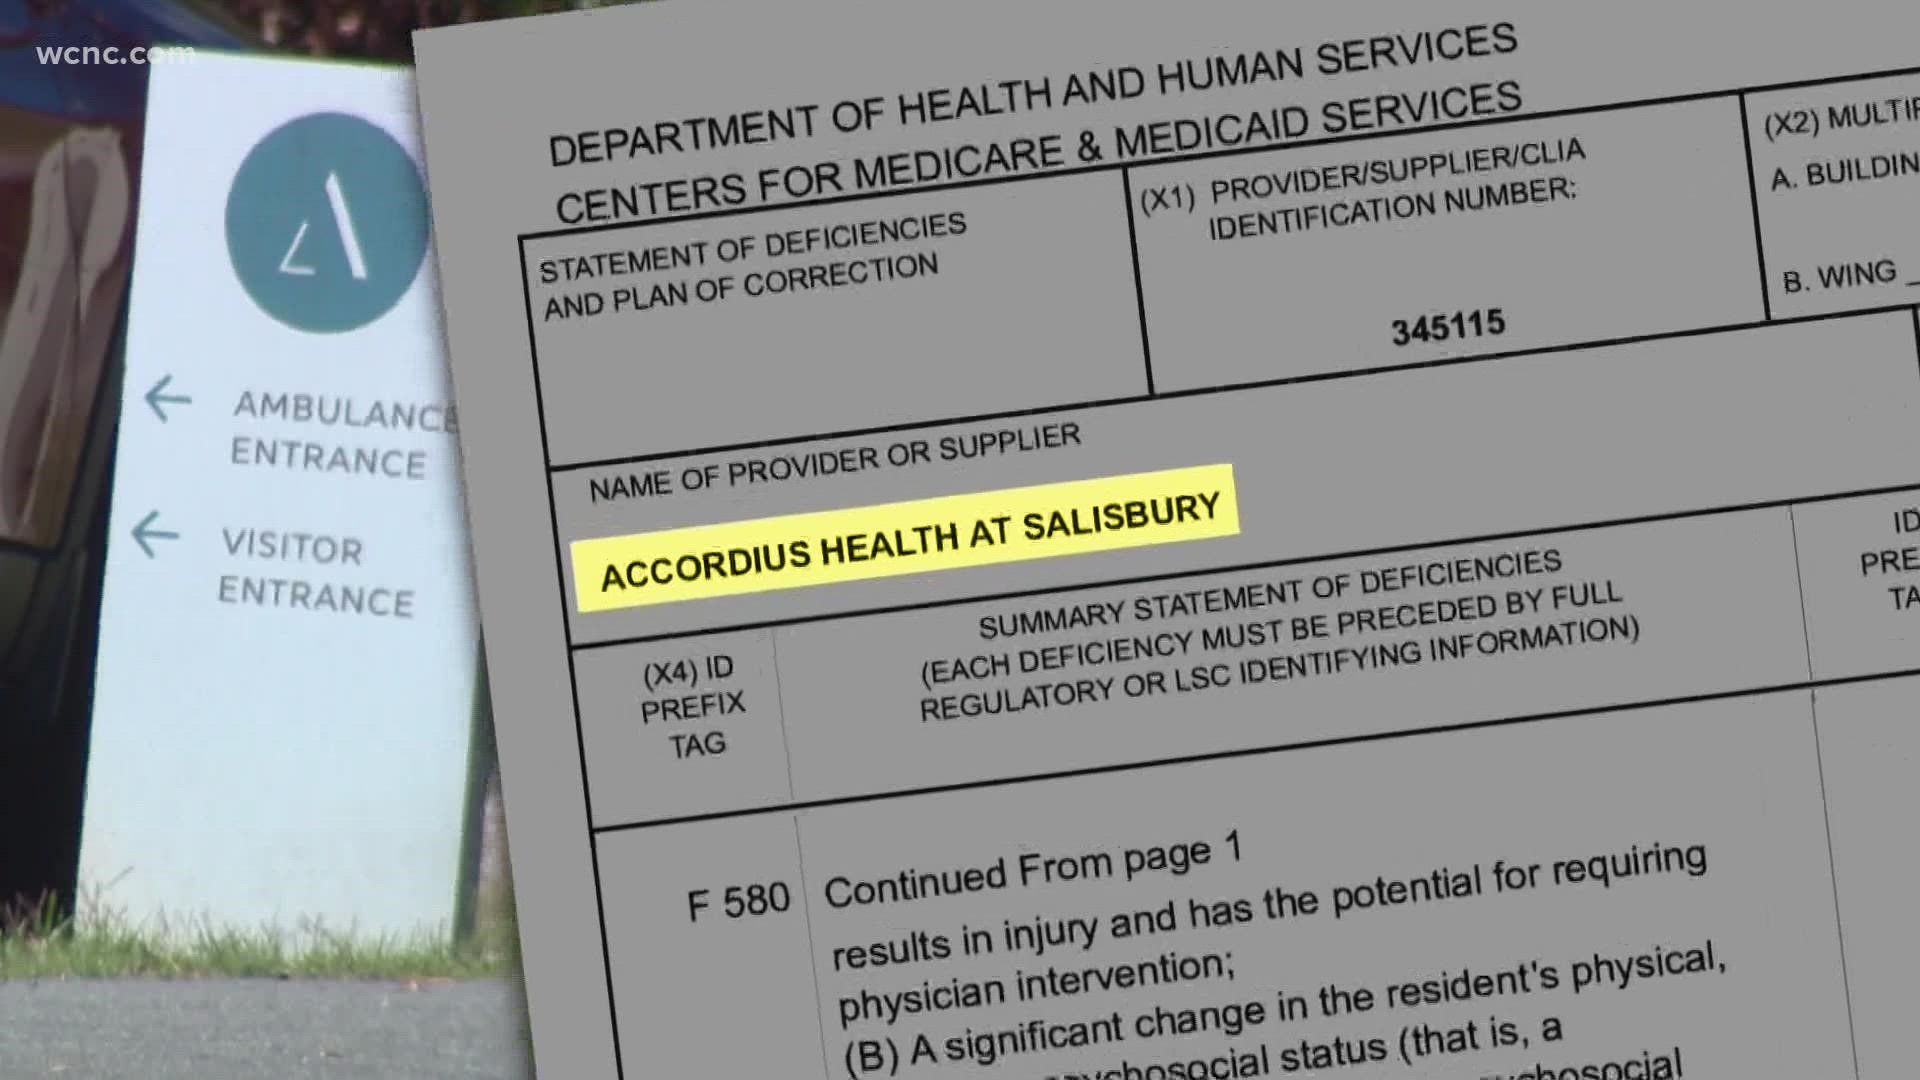 The recent inspection found Accordius Health at Salisbury workers believed the man swallowed a rodent but failed to immediately alert his doctor and family.